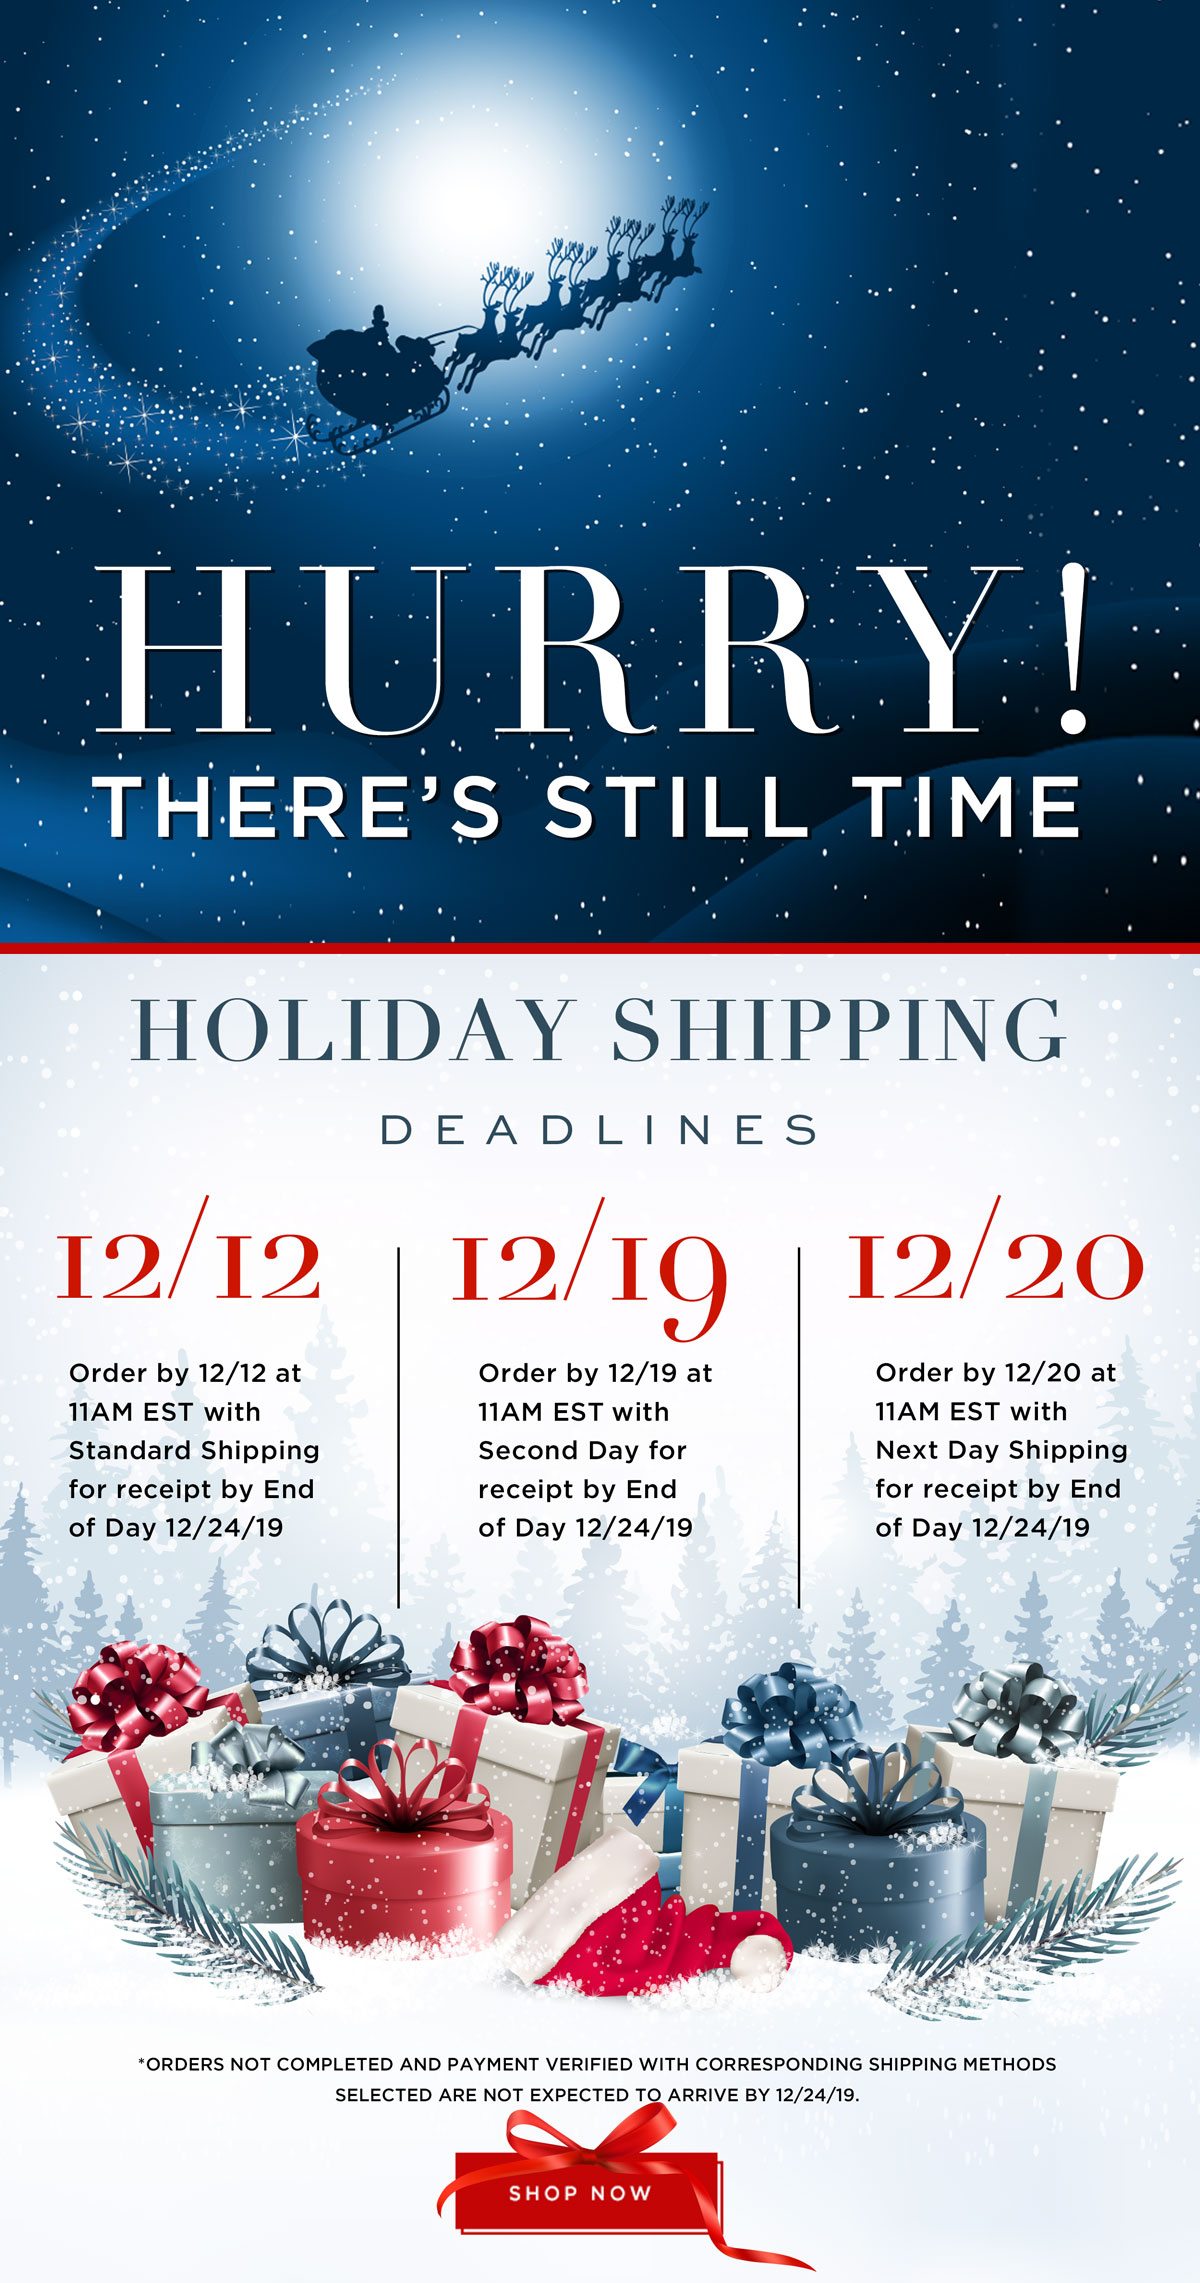 Hurry There's Still Time - Holiday Shipping Deadlines - Order by - 12-12 - with standard shipping - 12-19 with second day shipping - 12-20 with next day shipping - to recieve by 12-24 - Shop Now 